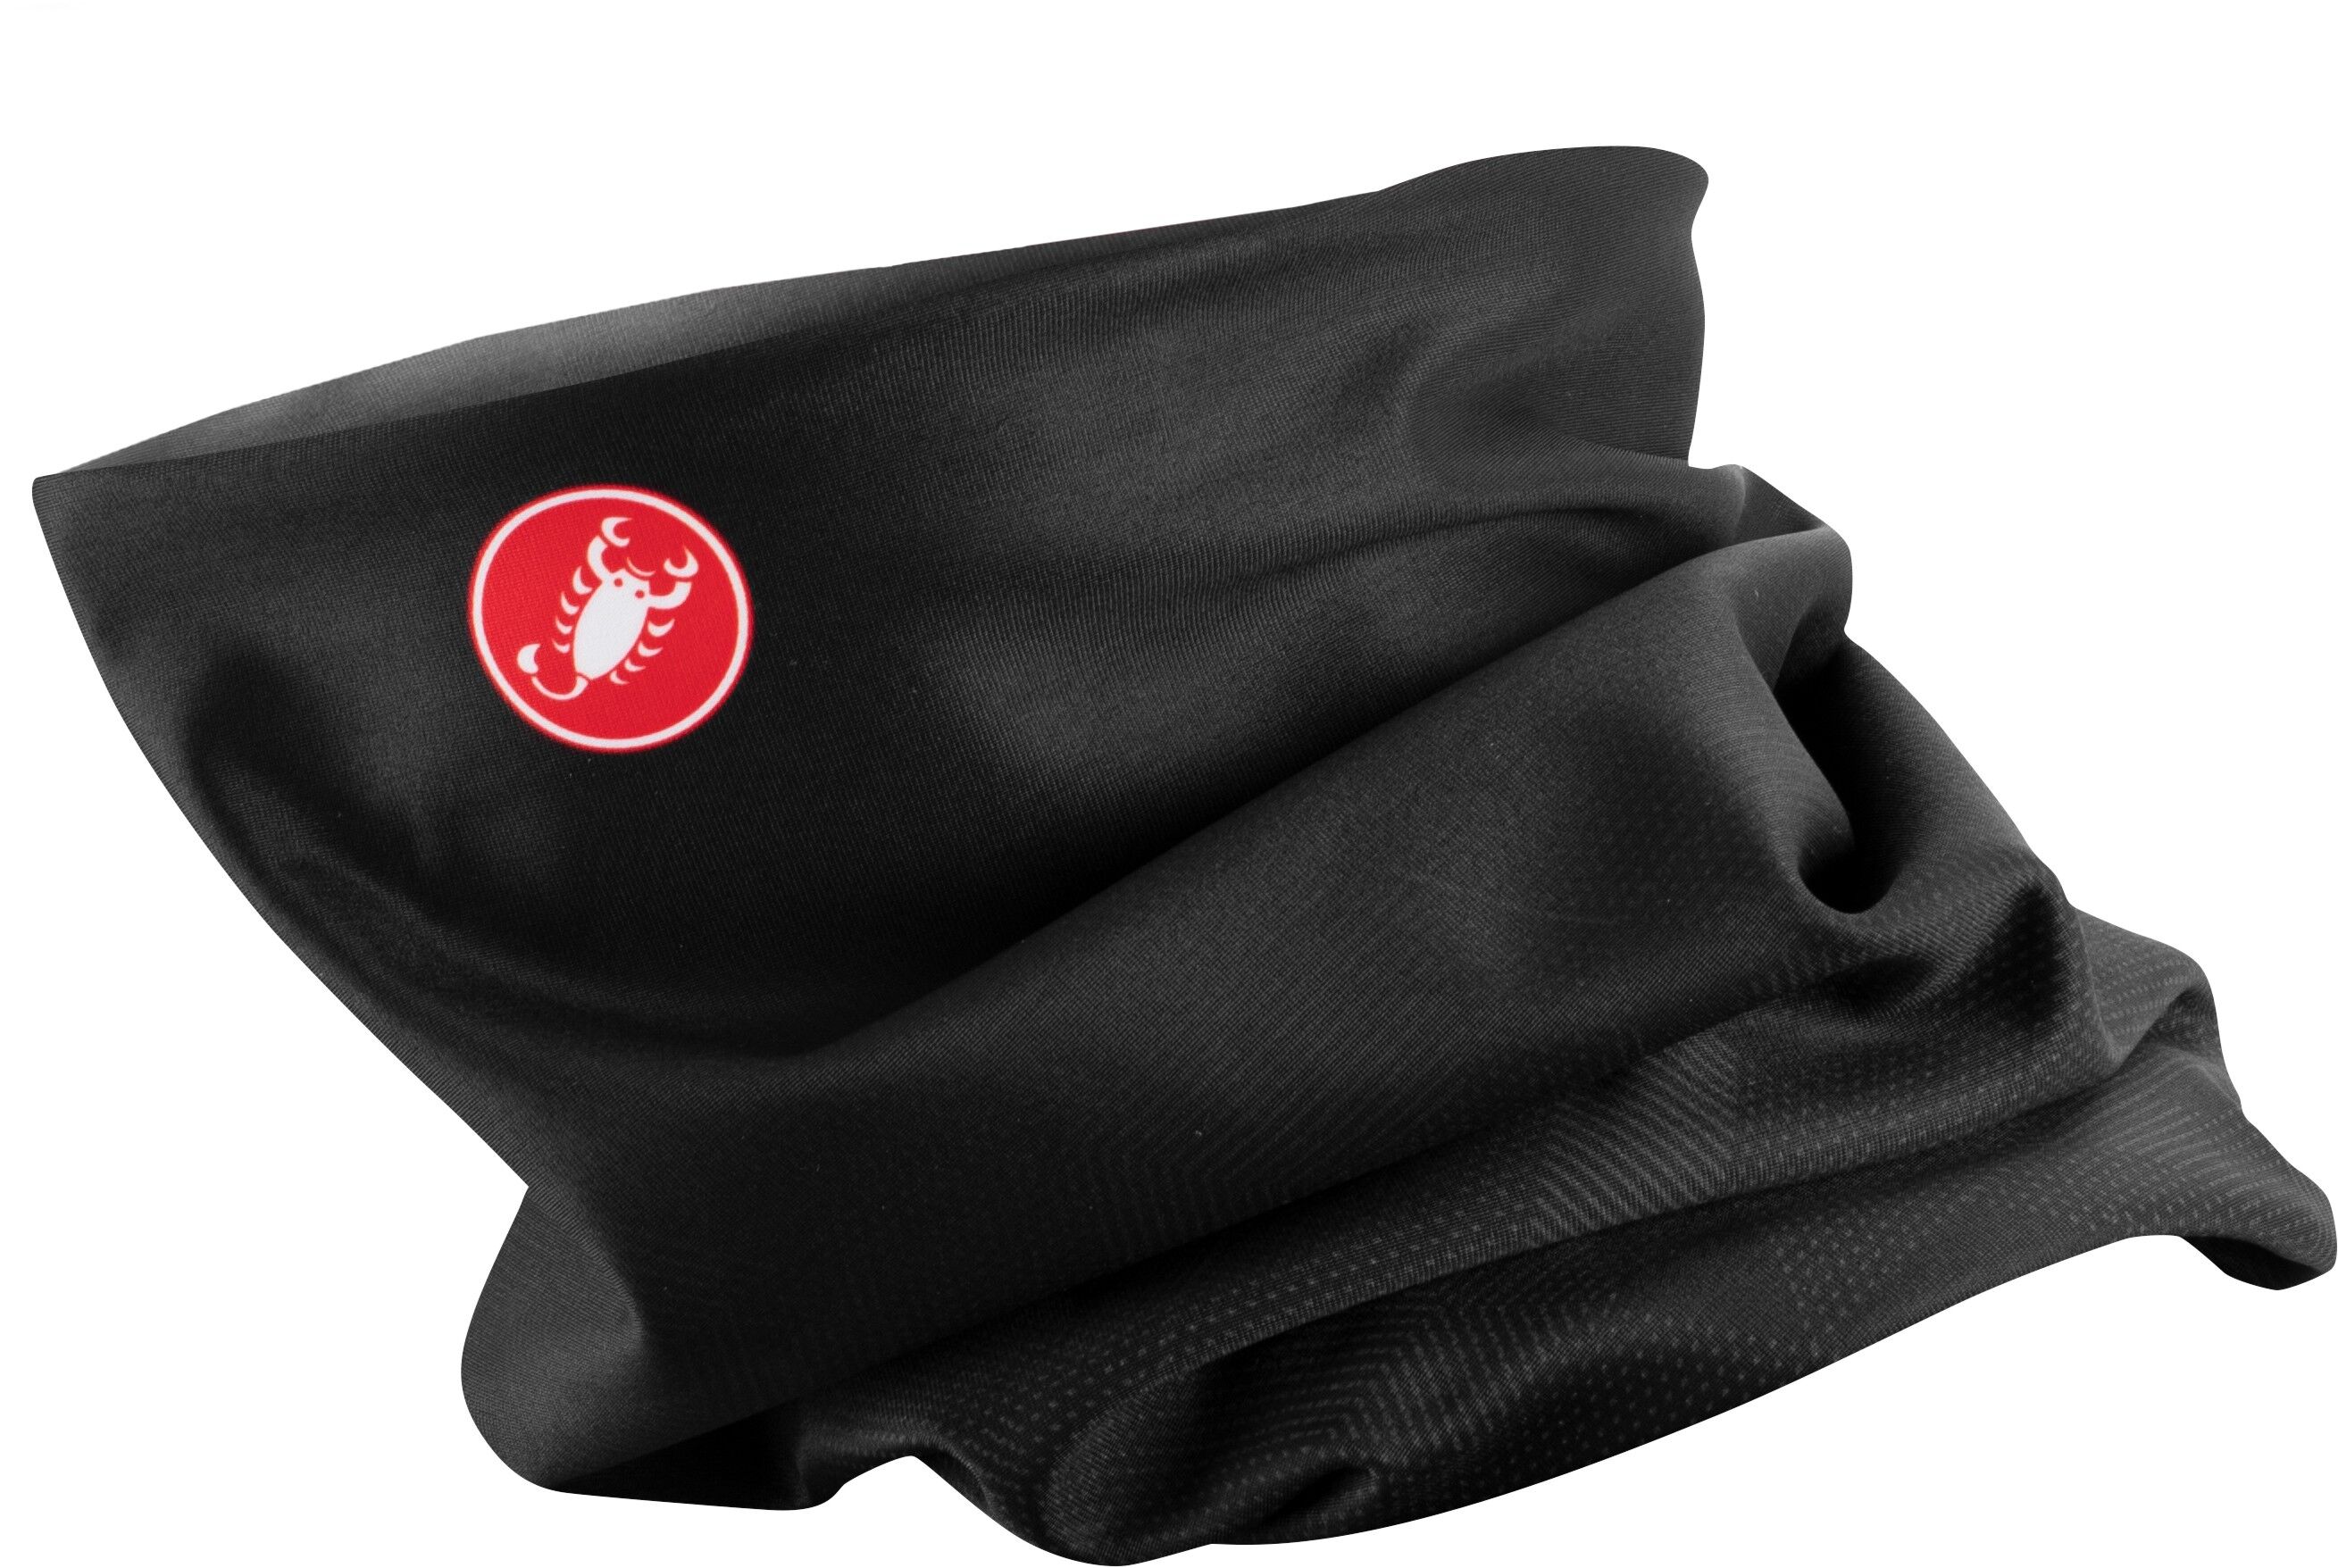 Castelli Pro Thermal Headthingy - Neck warmer - Women's